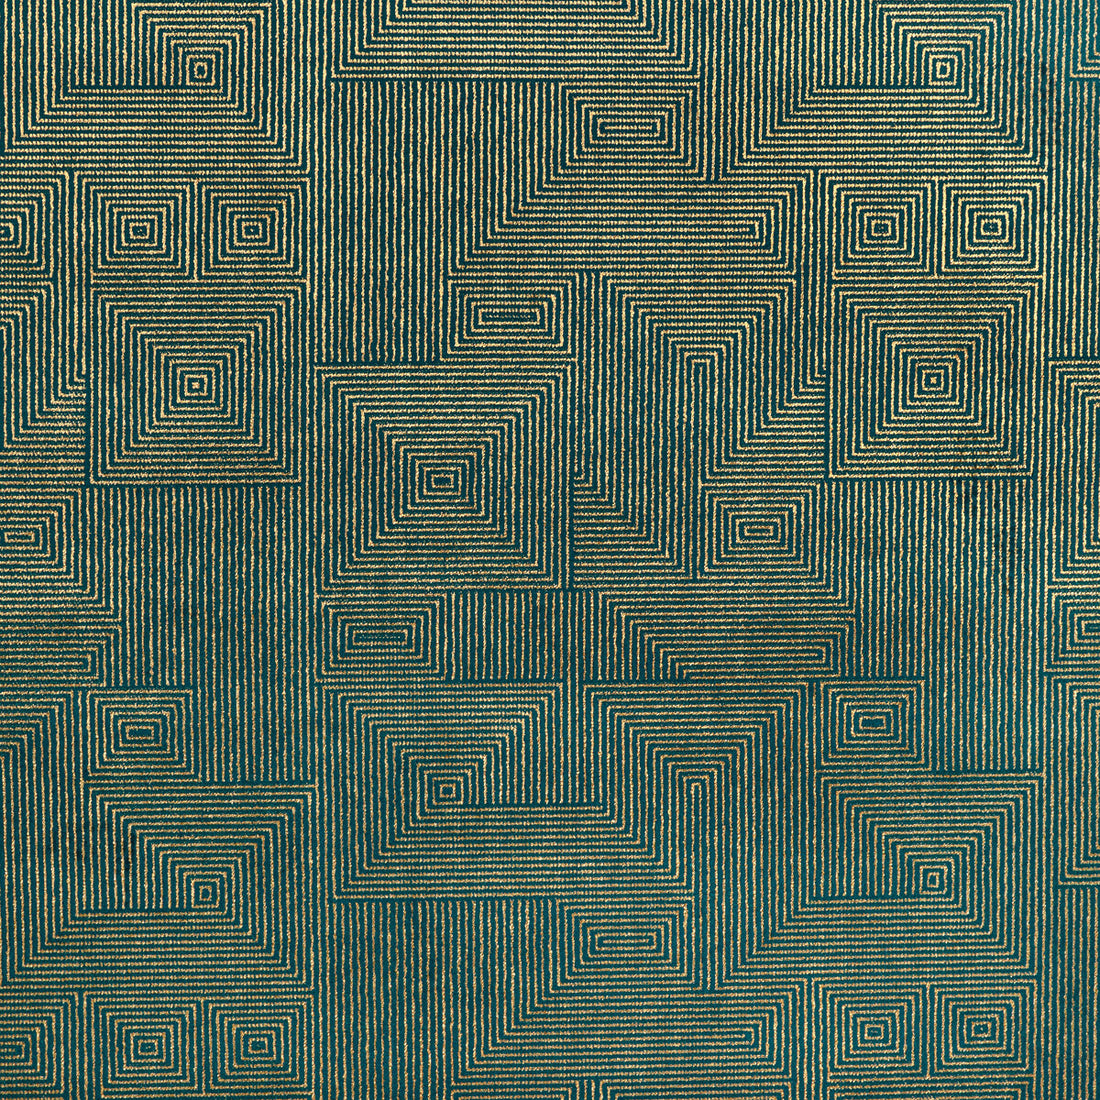 New Order fabric in malachite color - pattern 36043.35.0 - by Kravet Contract